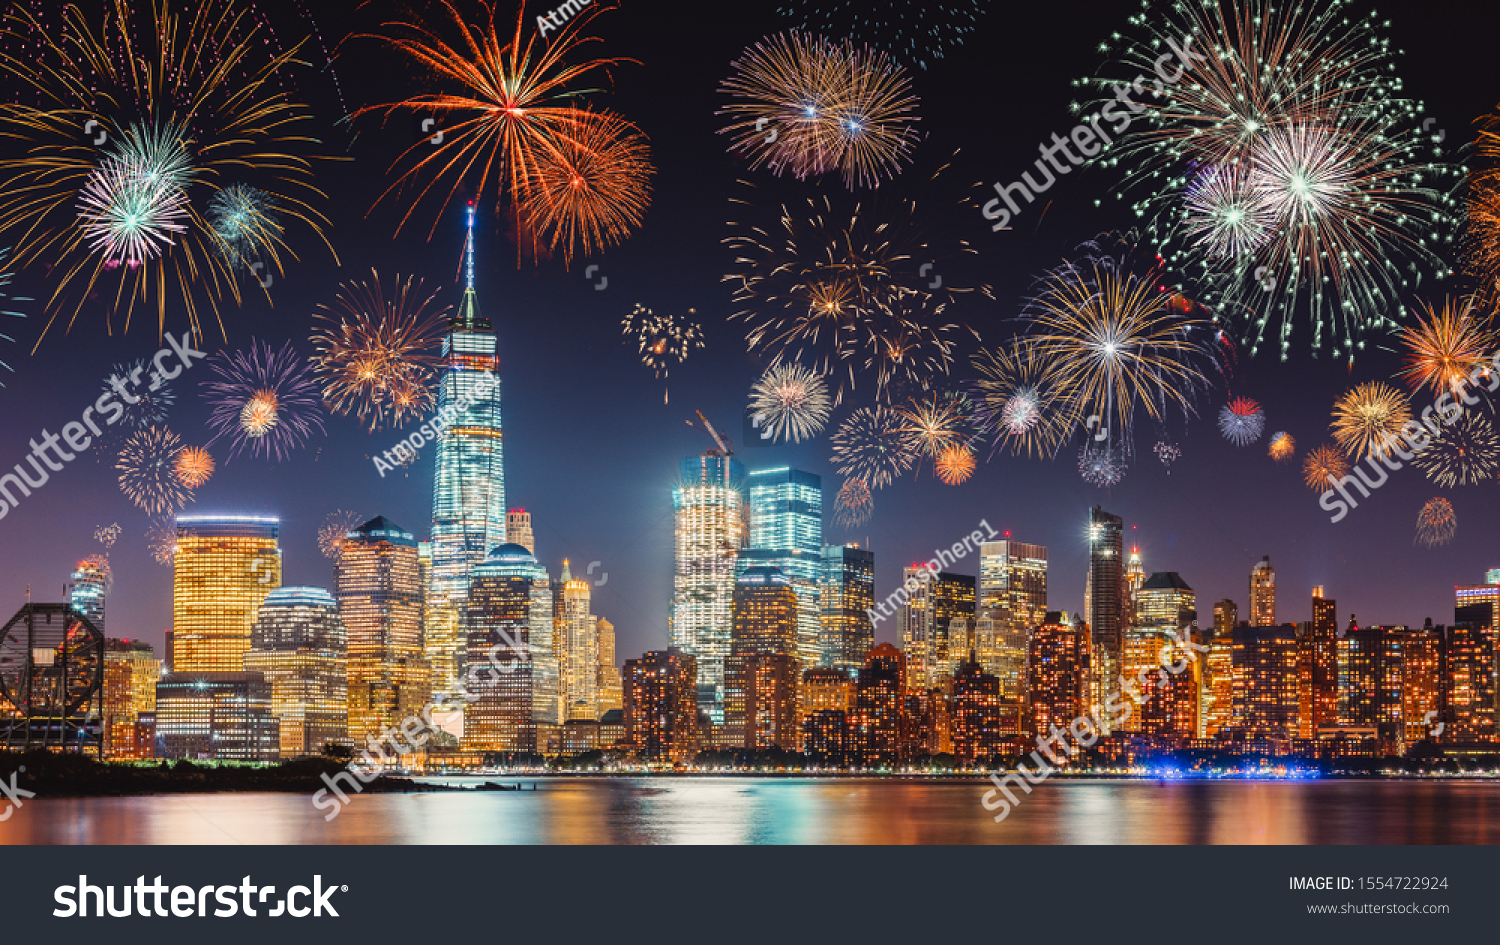 New Years Eve with colorful Fireworks over New York City skyline long exposure with dark blue-purple sky, orange city light glow and reflections in the river #1554722924